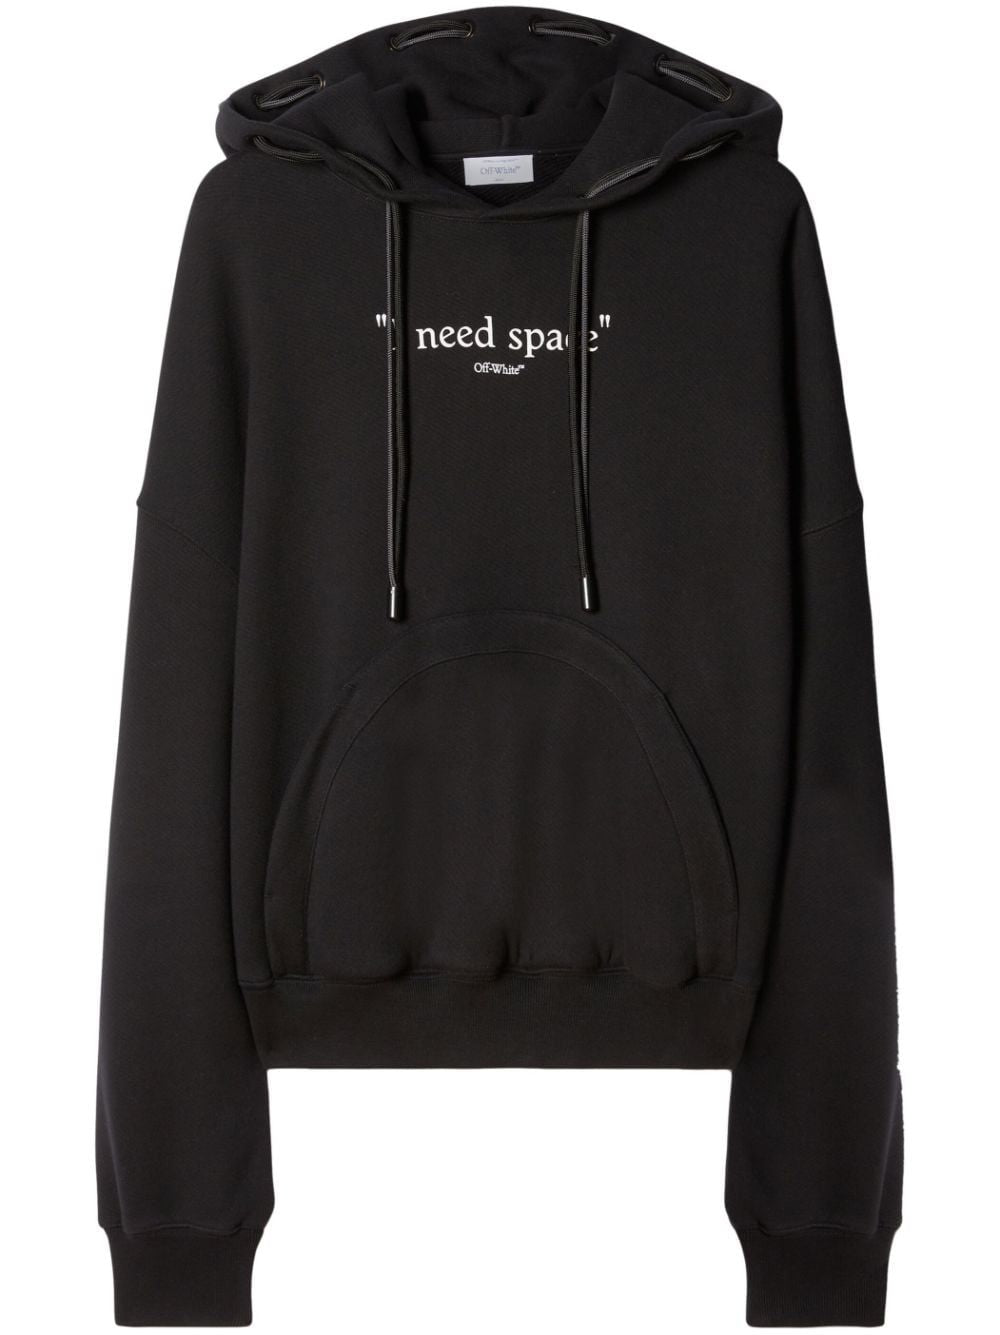 OFF-WHITE Black and White Hooded Double String Sweatshirt for Men - FW23